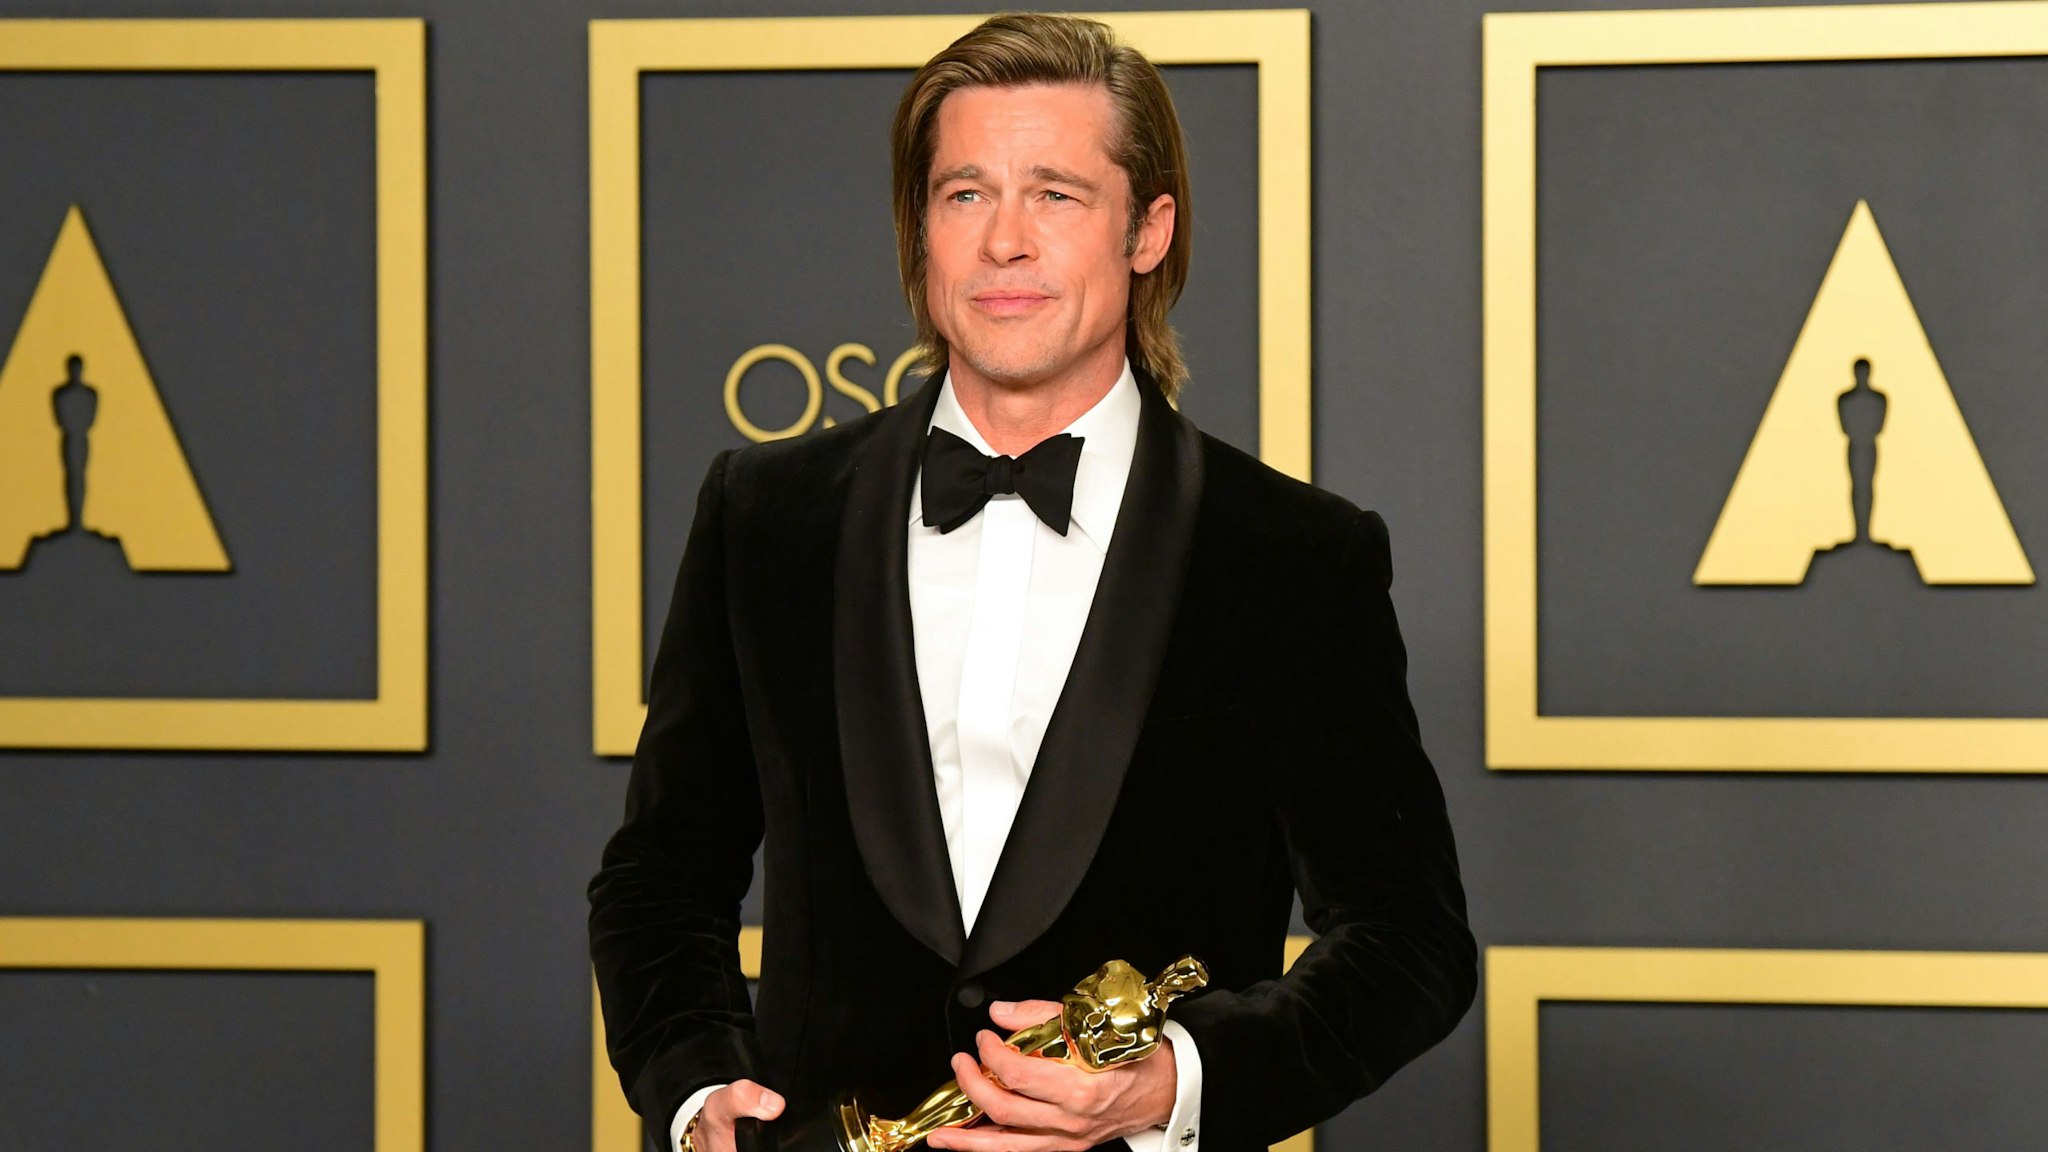 US actor Brad Pitt poses in the press room with the Oscar for Best Supporting Actor during the 92nd Oscars at the Dolby Theater in Hollywood, California on February 9, 2020.